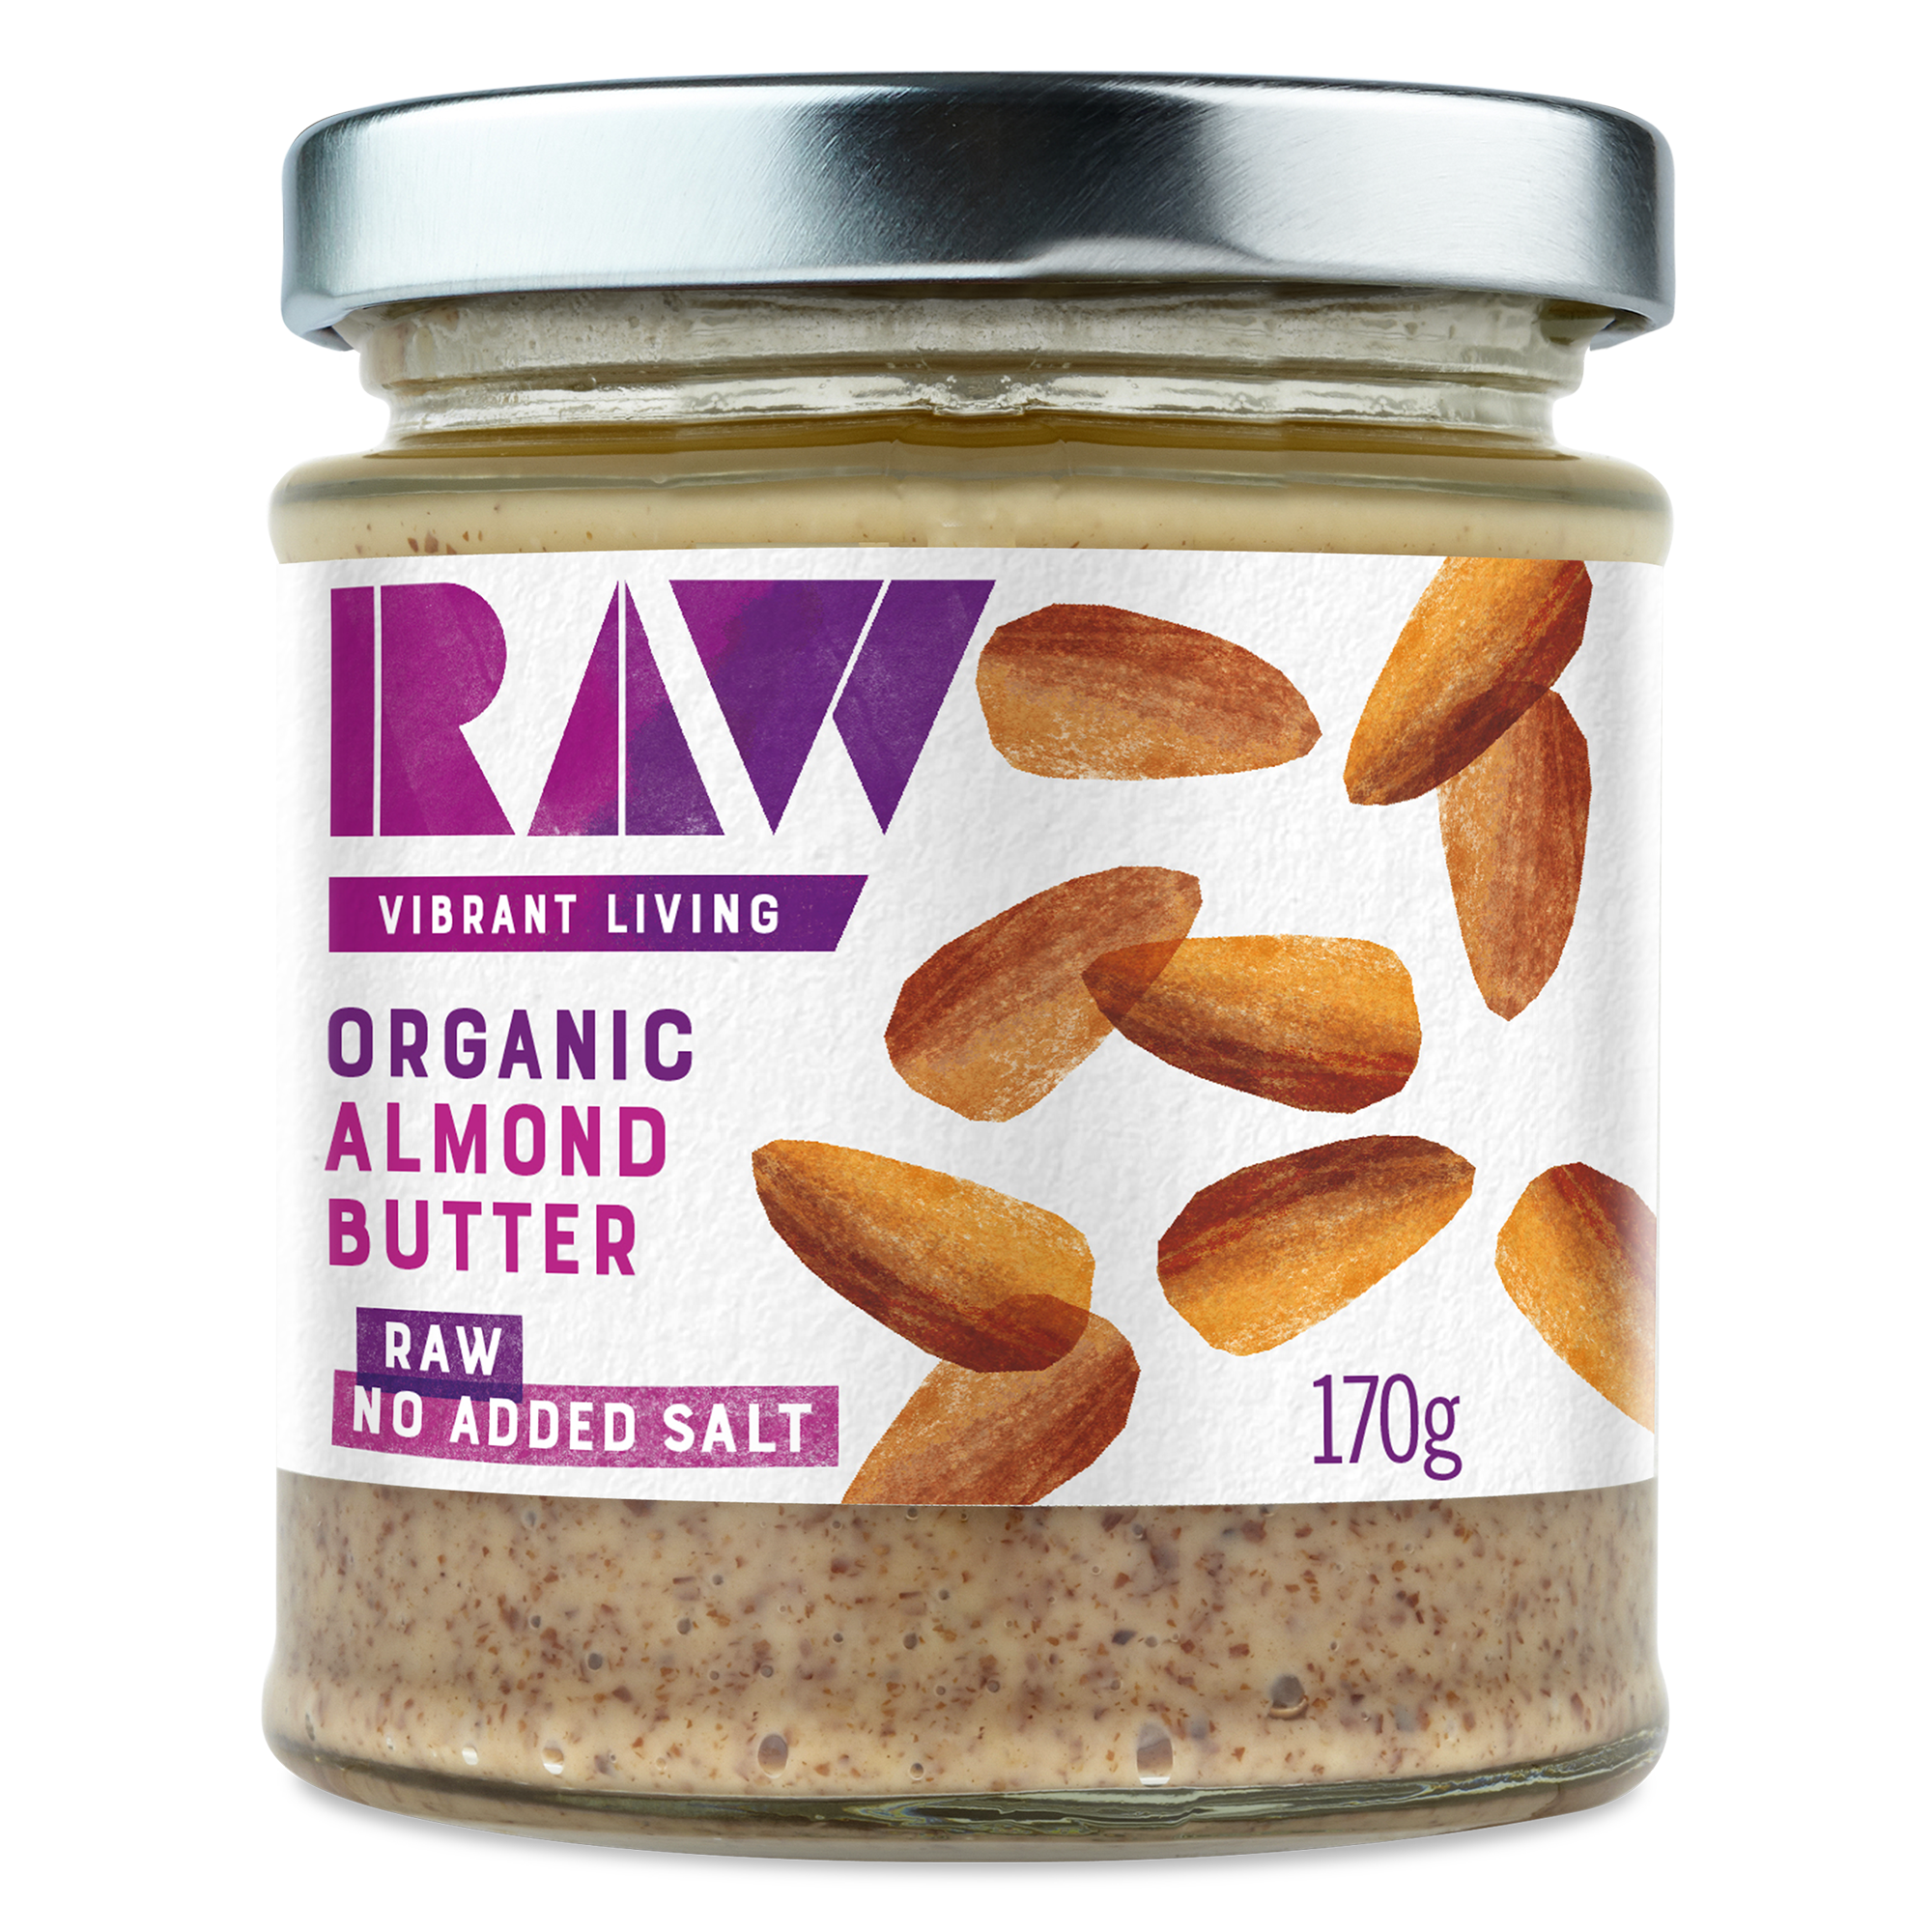 WHOLE ALMOND BUTTER